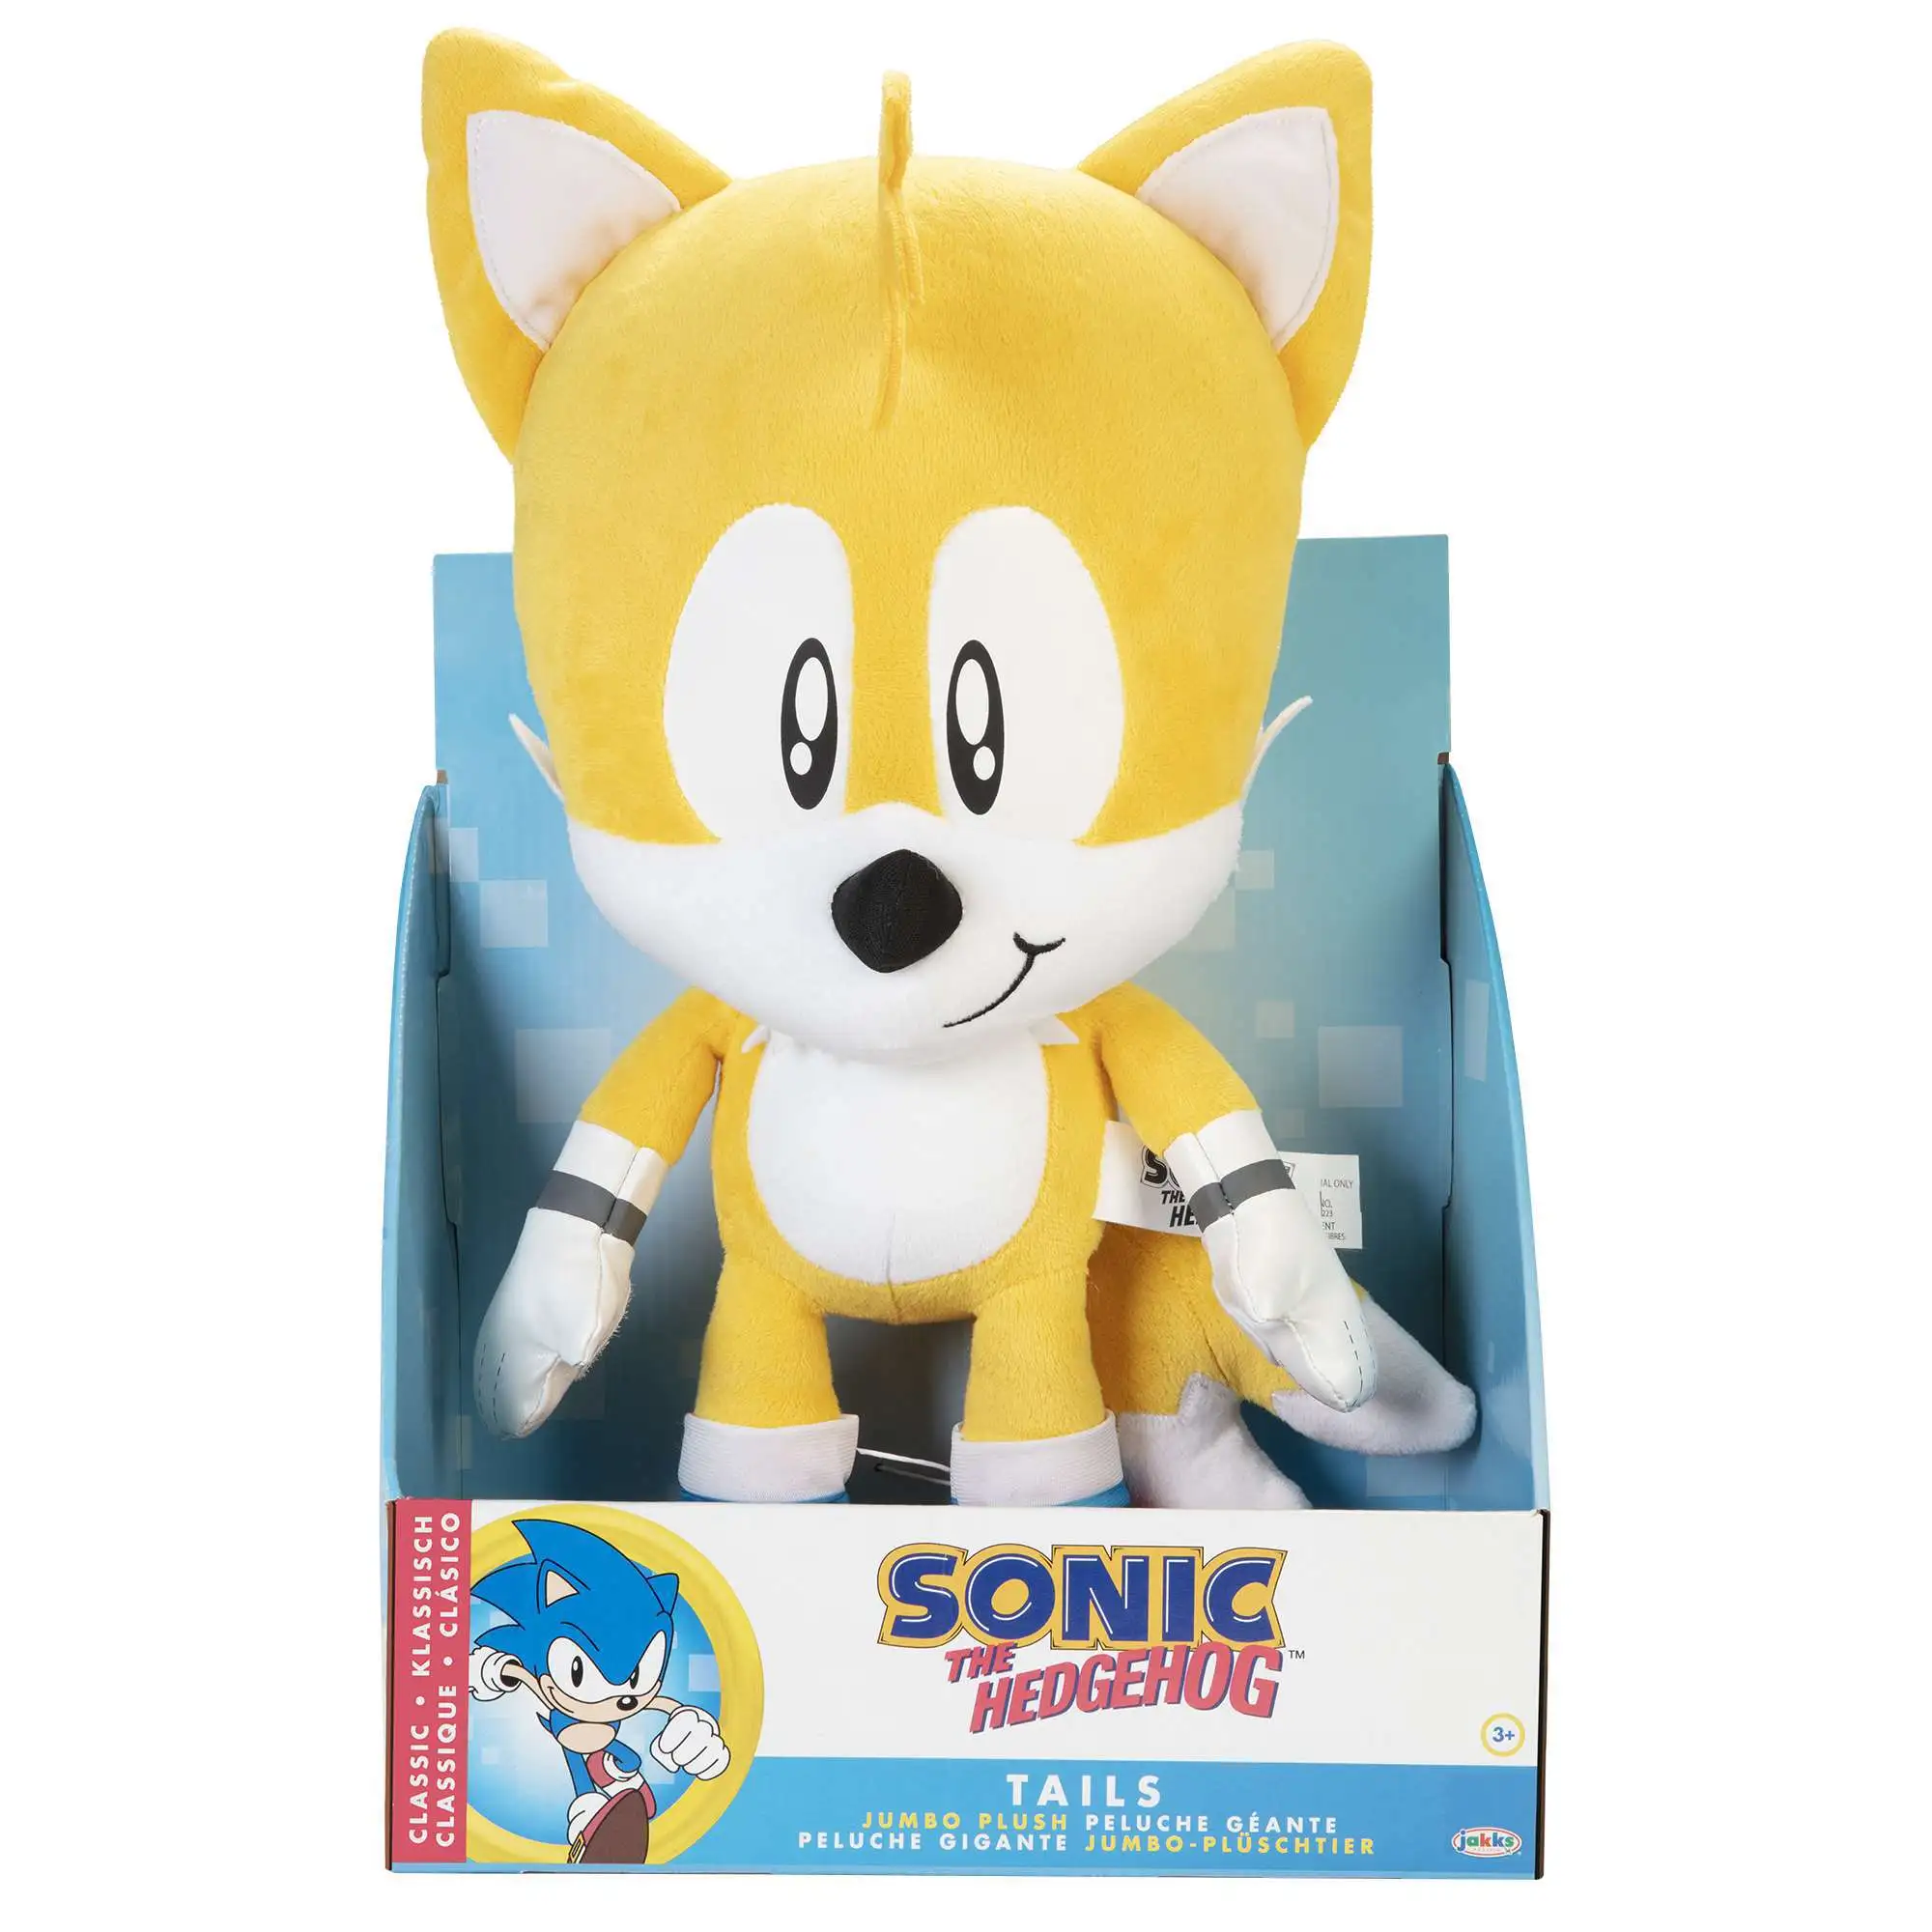 Hot Sale Sonic The Hedgehog Plush Doll Classic Anime Tails Amy